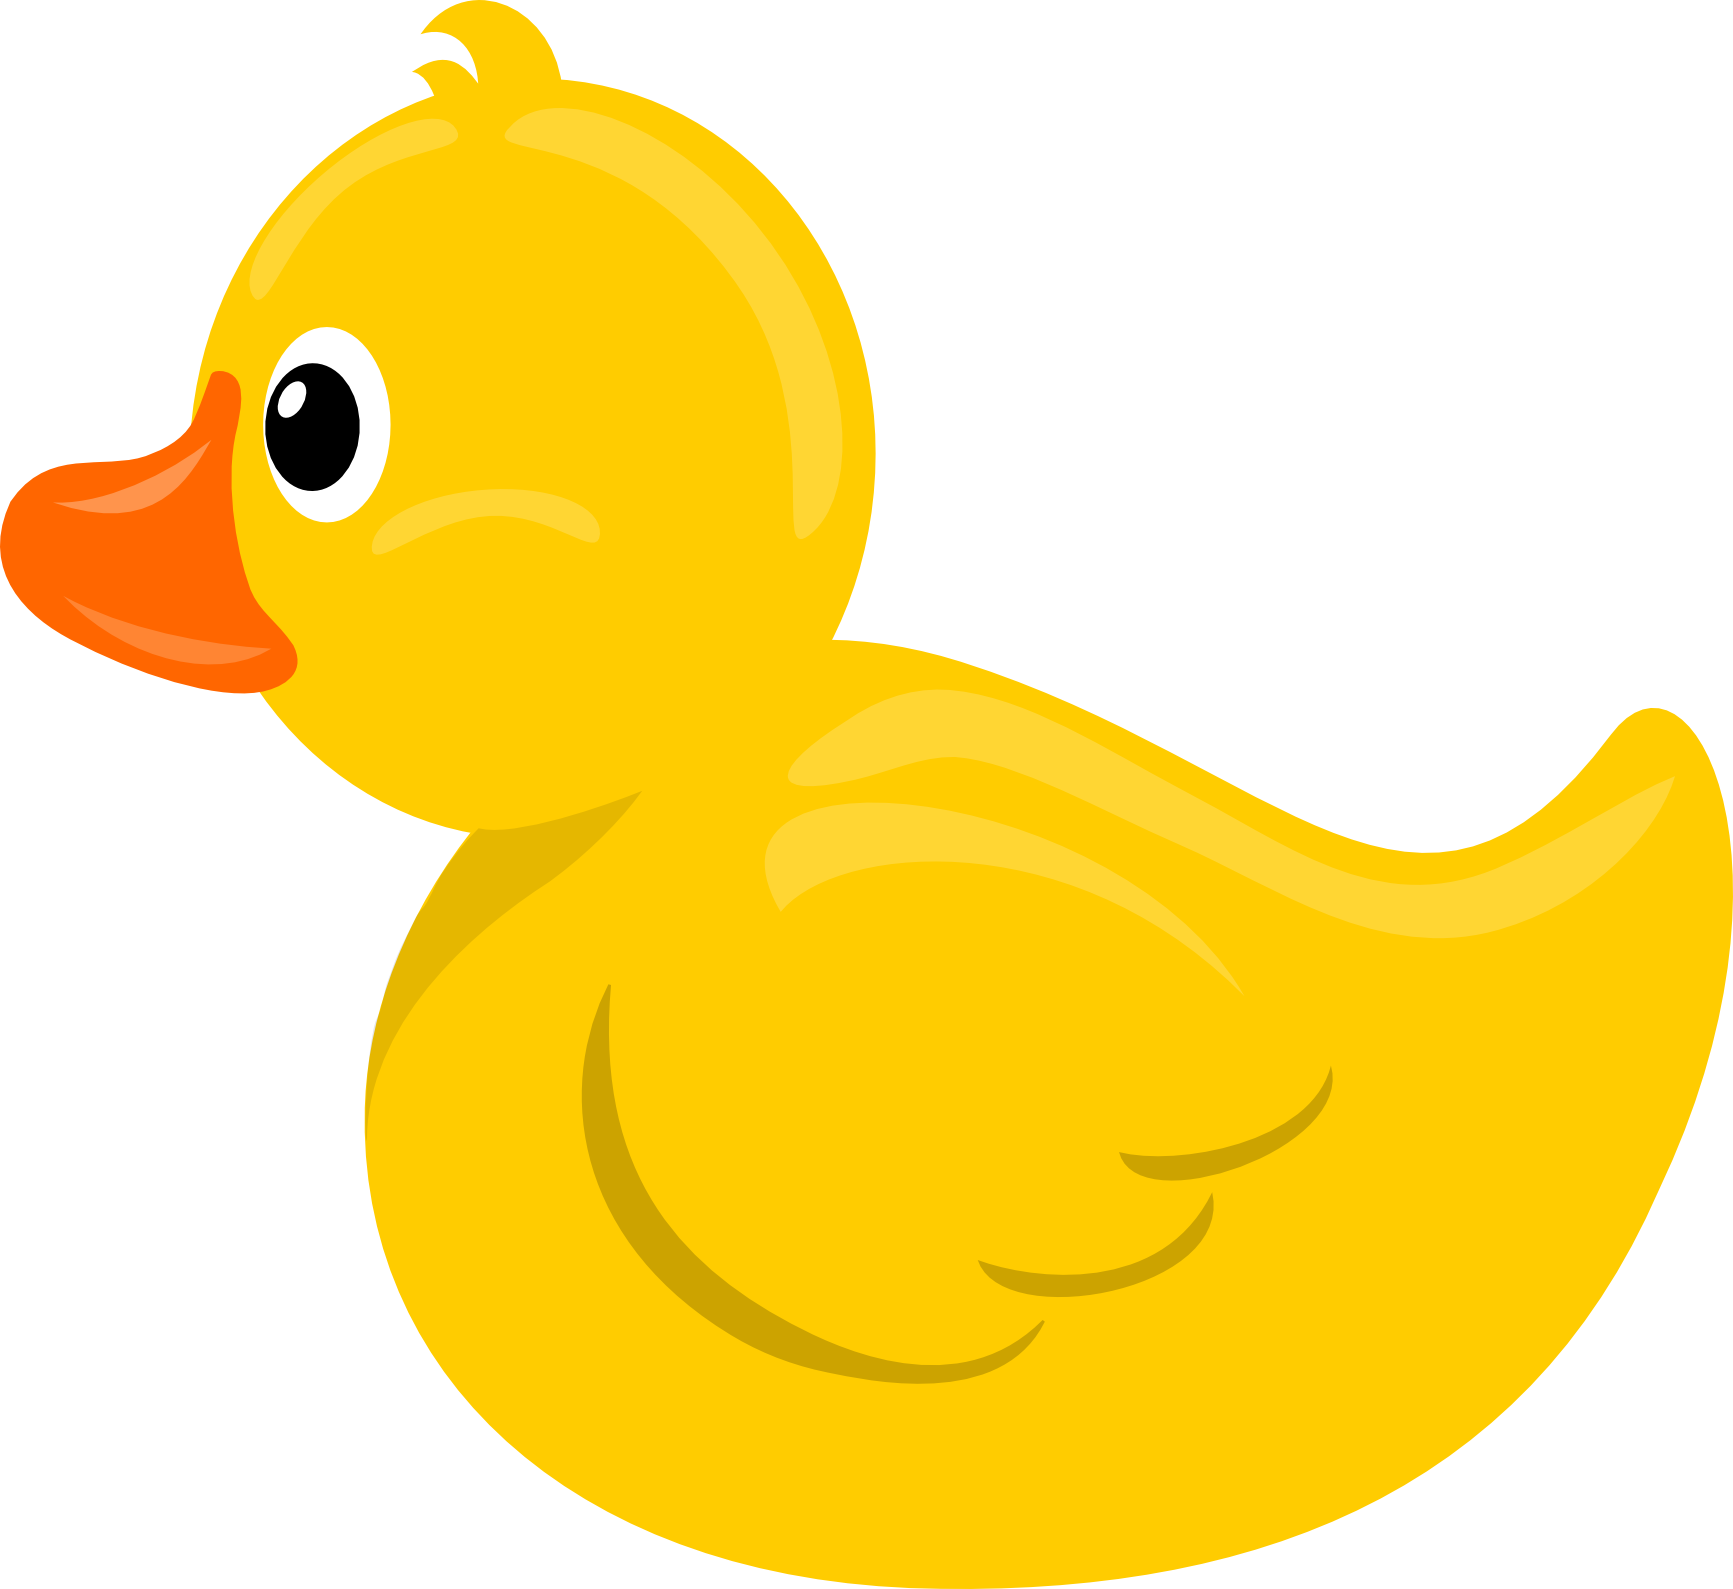 Animated duck clipart - Cliparting.com